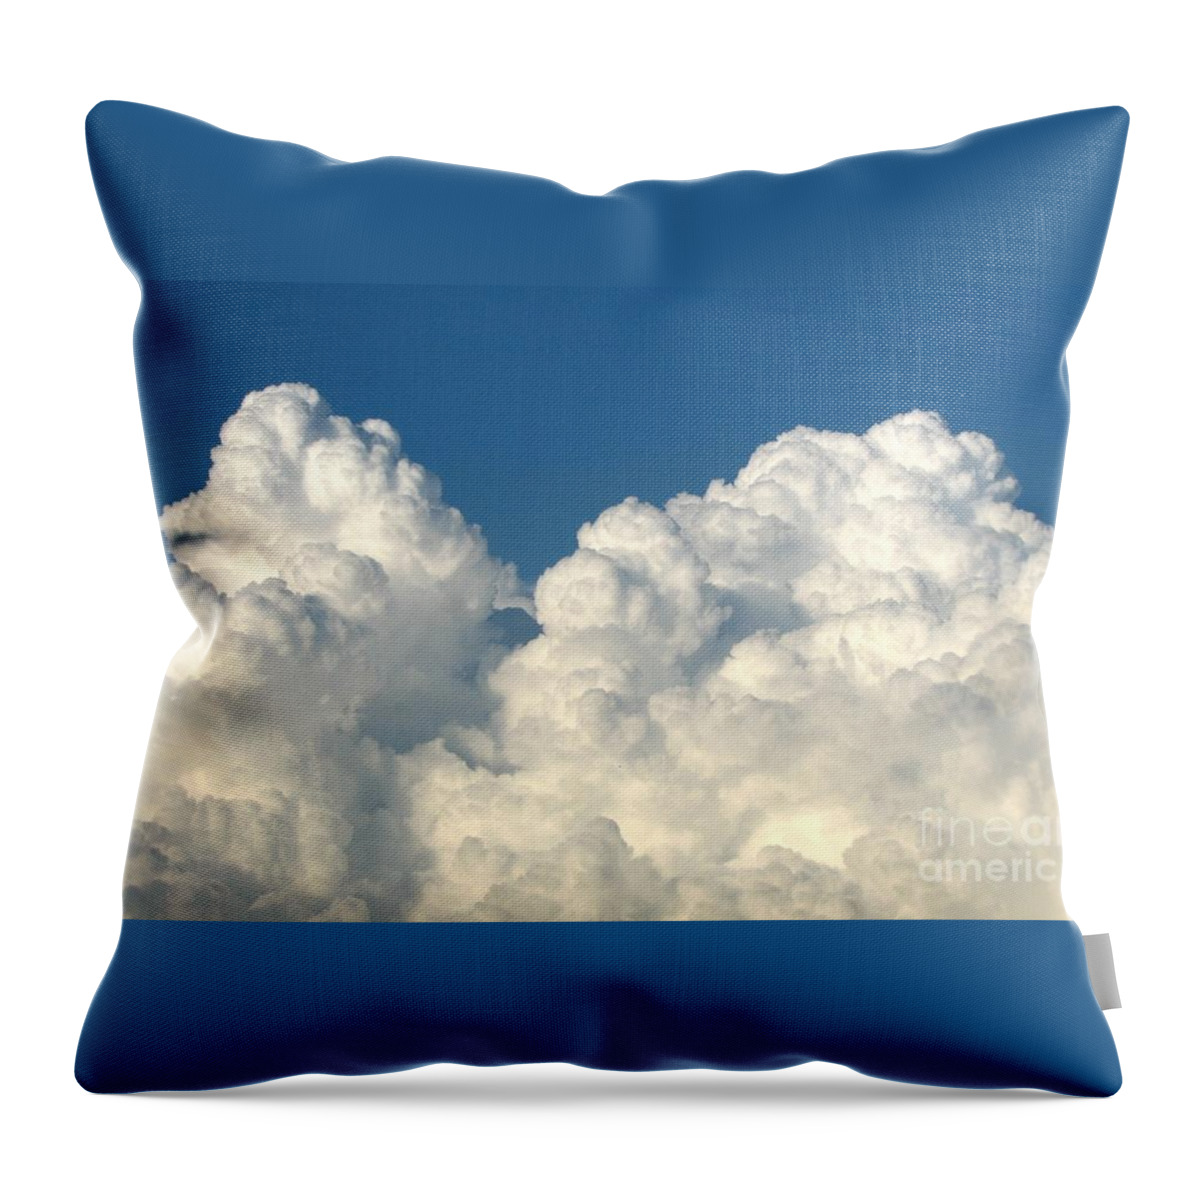 Clouds Throw Pillow featuring the photograph Billowing Clouds 1 by Rose Santuci-Sofranko